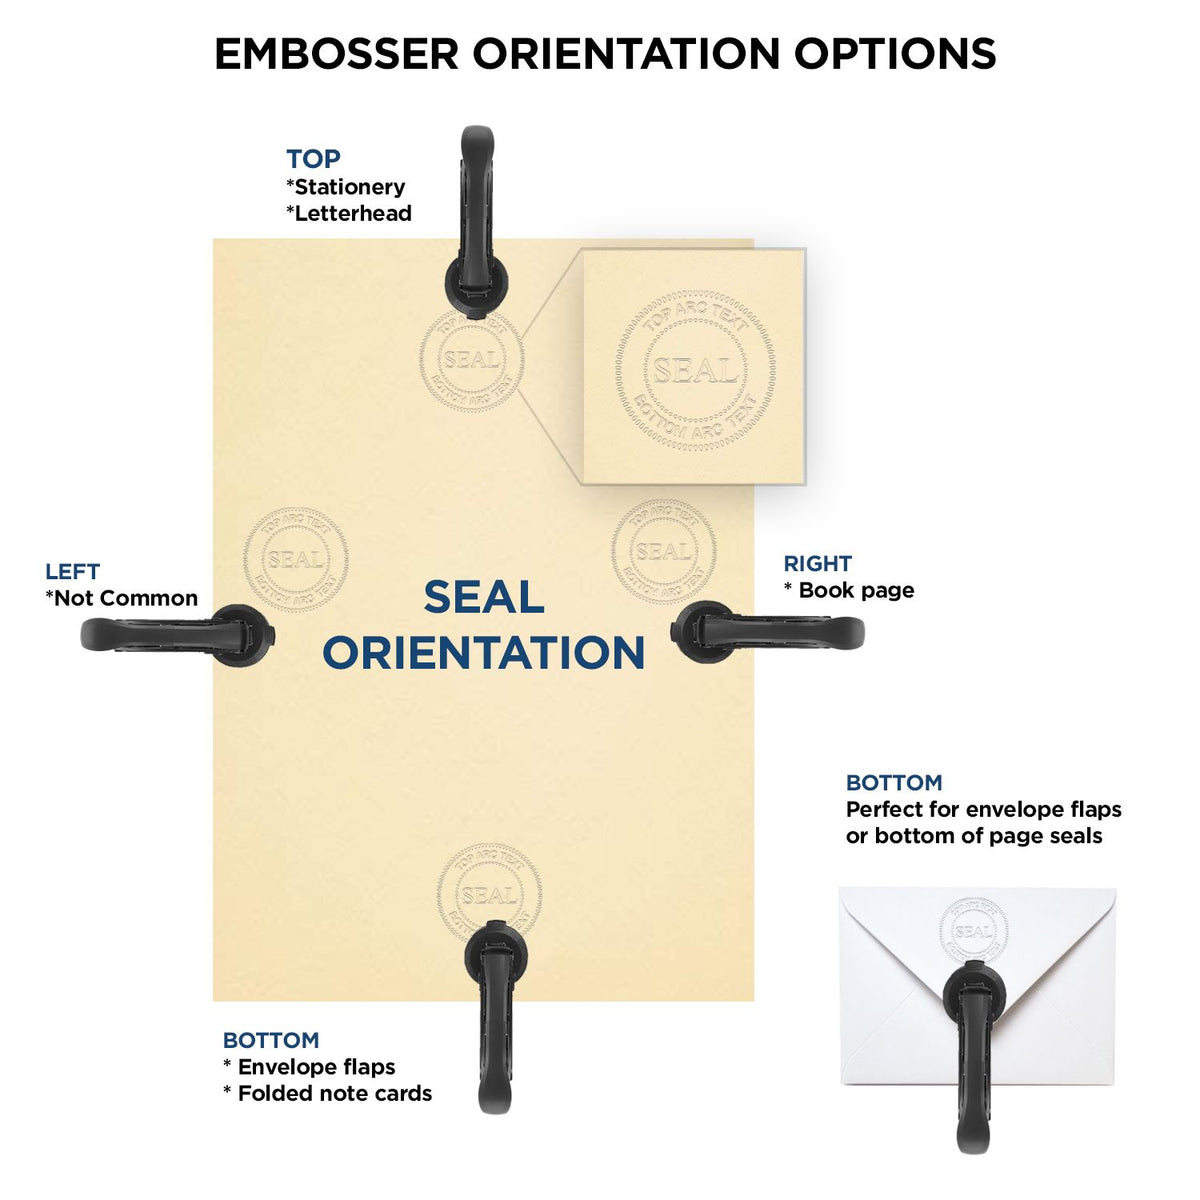 An infographic for the Gift South Dakota Land Surveyor Seal showing embosser orientation, this is showing examples of a top, bottom, right and left insert.